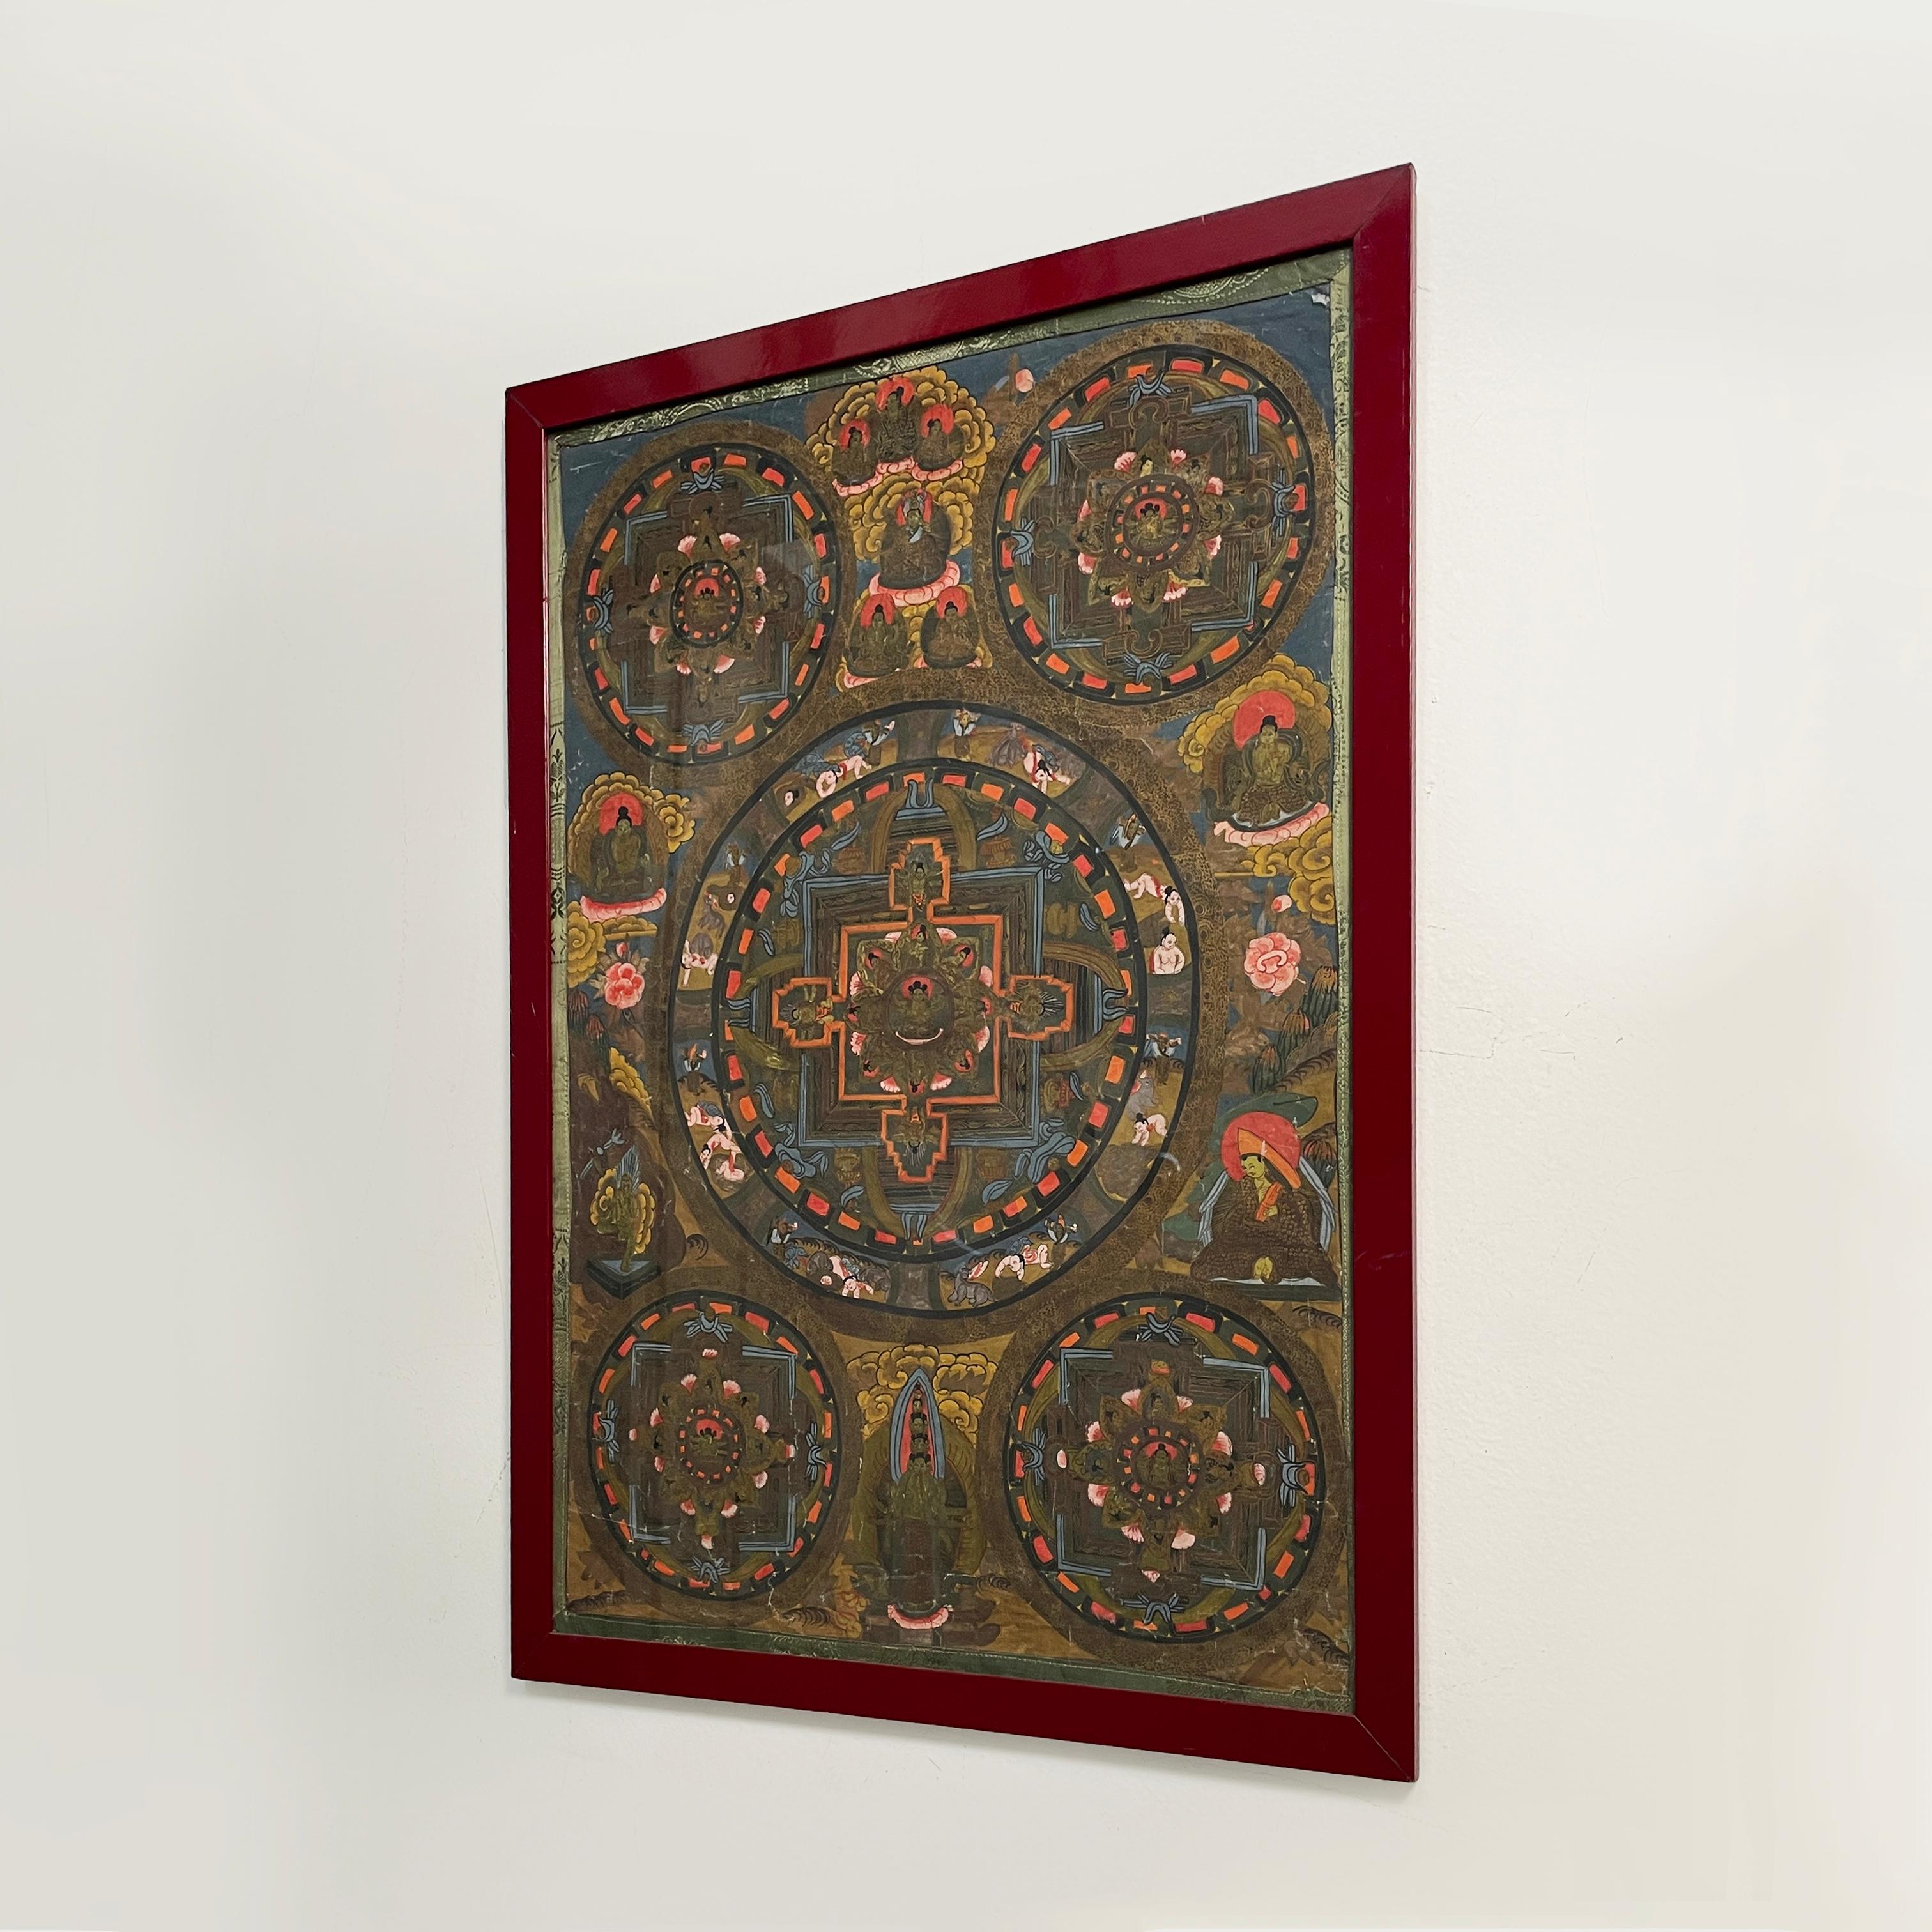 Asian Batik painting of Indian religion in wood frame, 1900-1990s
Painting painted with the batik technique on fabric. The structure of the painting is divided into 5 circles, one at each corner plus a central one. In each circle and between the